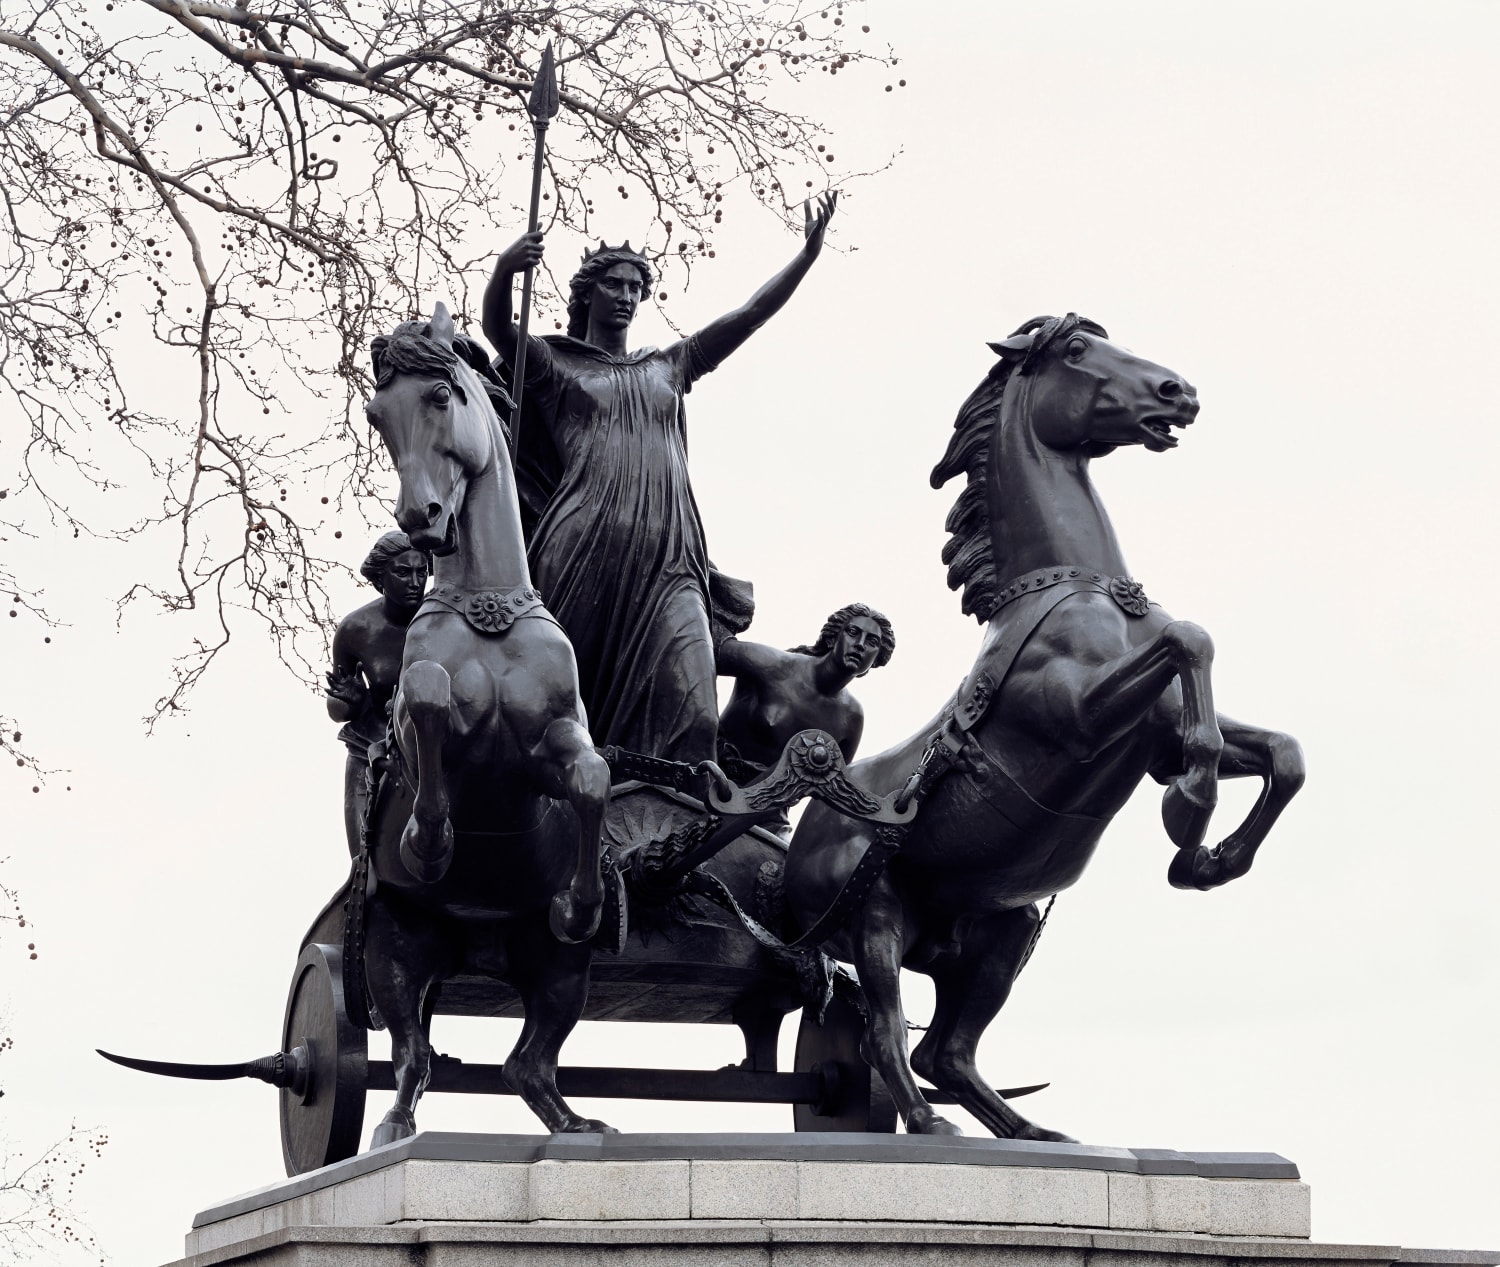 TIL of Boudica, a Celtic queen who led a revolt against Roman rule in ancient Britain in A.D. Boudica’s forces had massacred some 70,000 Romans and pro-Roman Britons and though her rebellion failed, she is celebrated today as a national heroine and an embodiment of the struggle for justice.